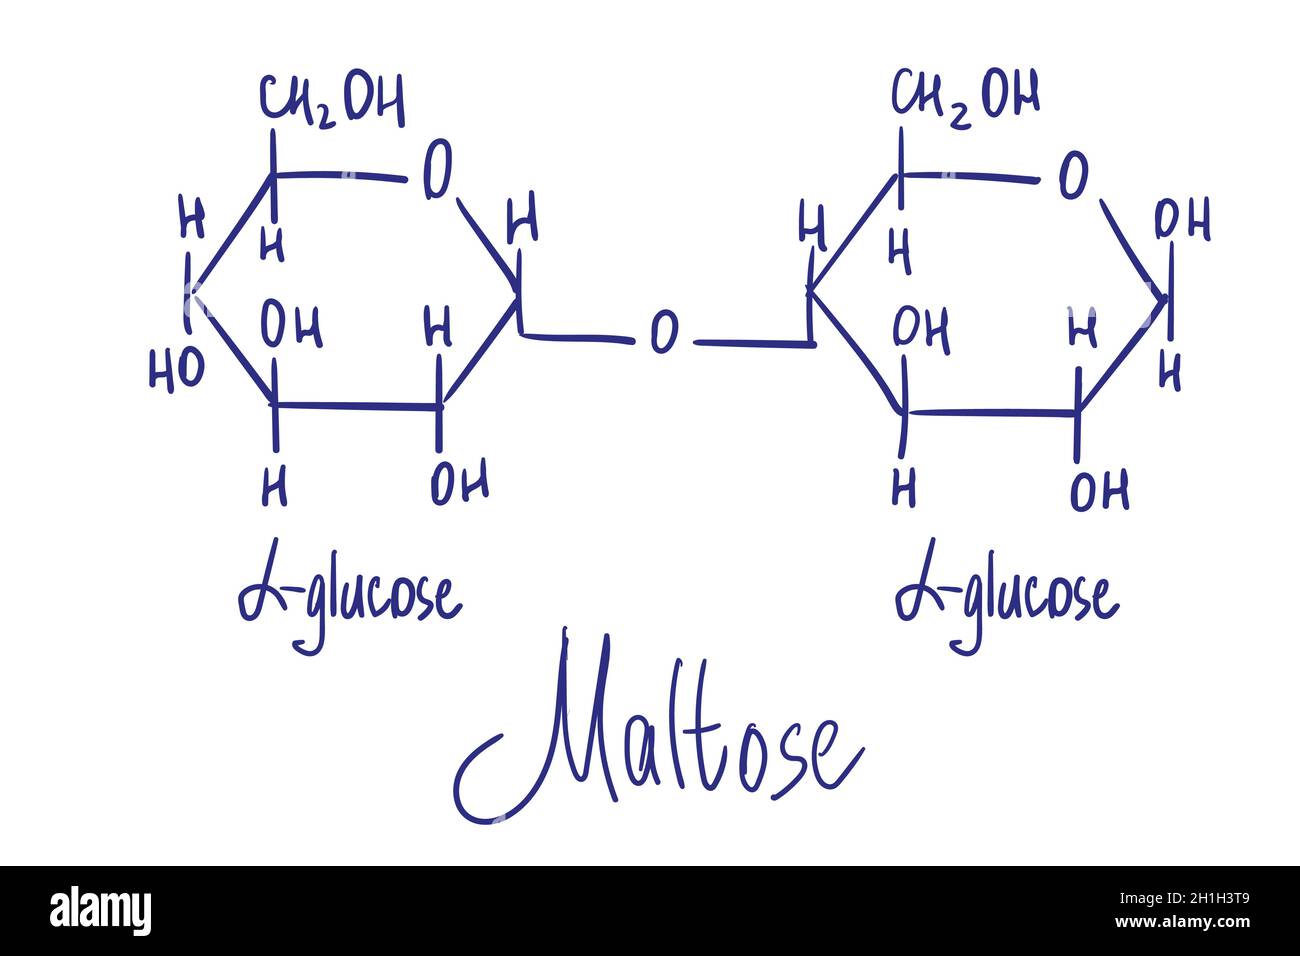 Maltose chemical structure. Vector illustration Hand drawn. Stock Vector